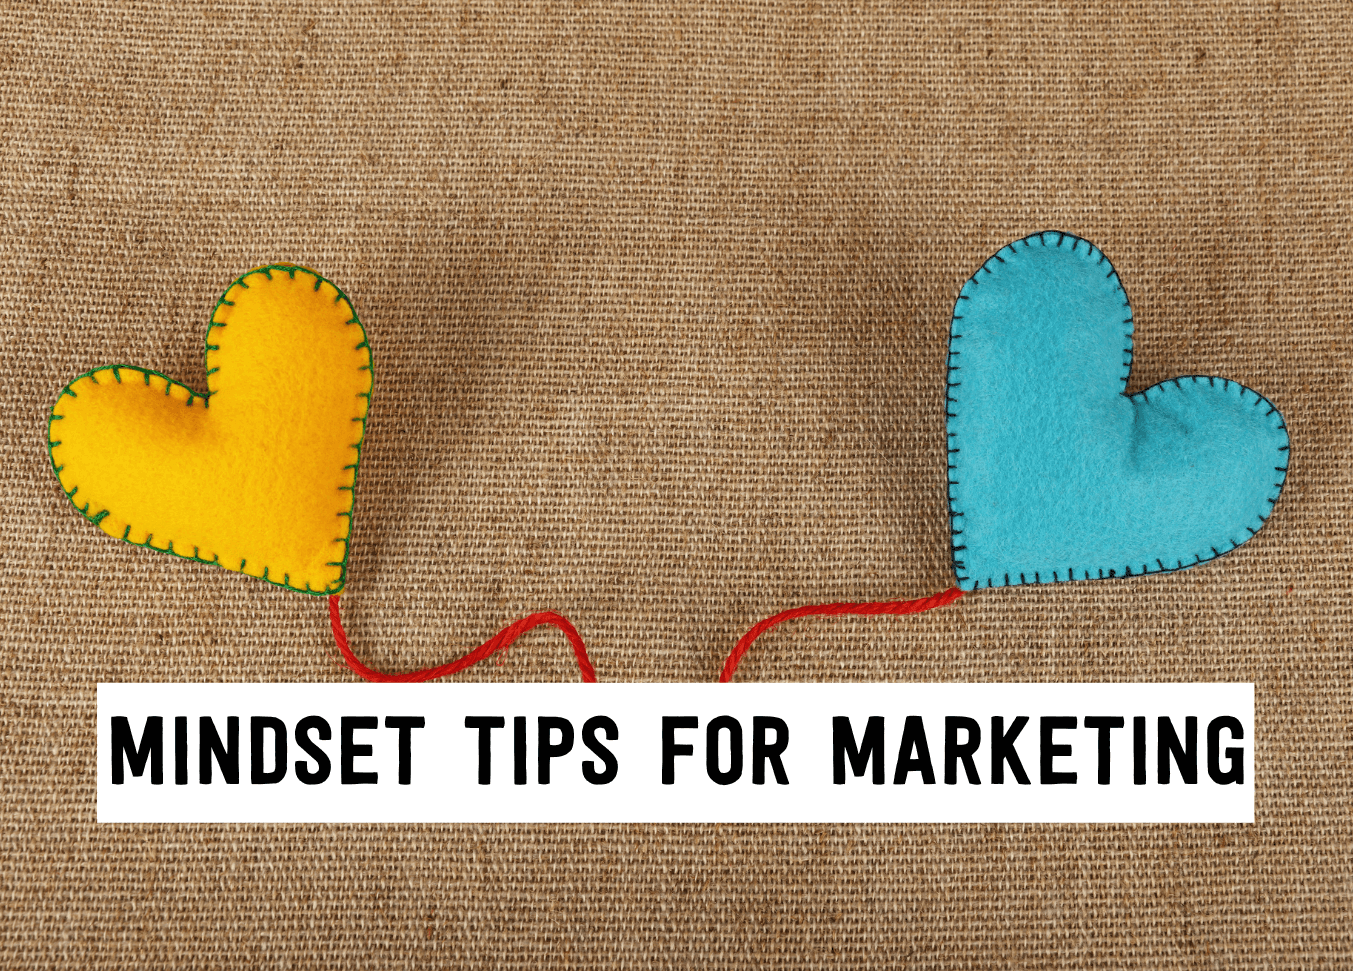 Mindset tips for marketing | Tizzit.co - start and grow a successful handmade business